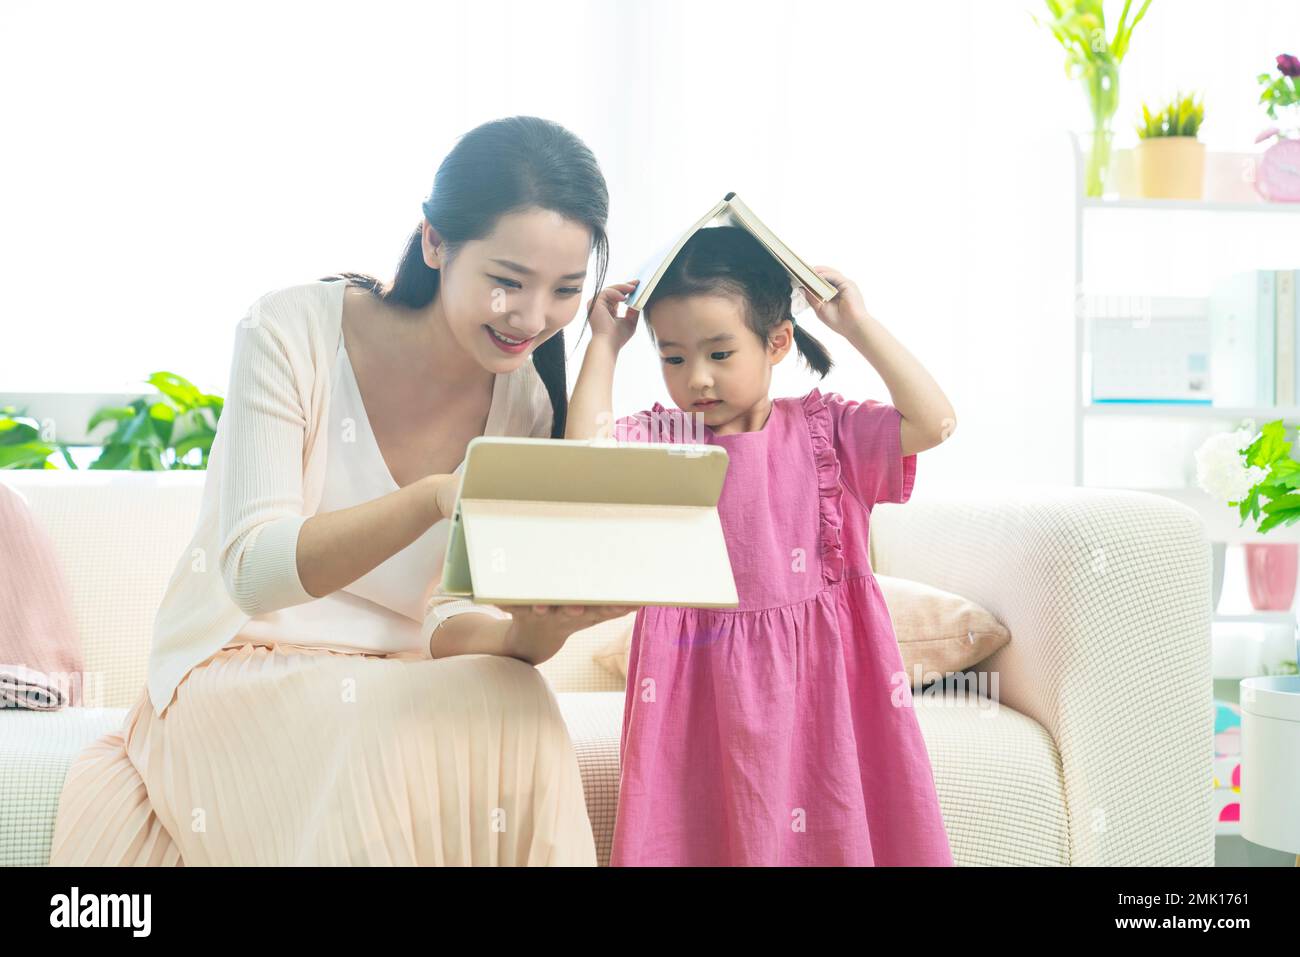 The little girl and her mother read a book together Stock Photo